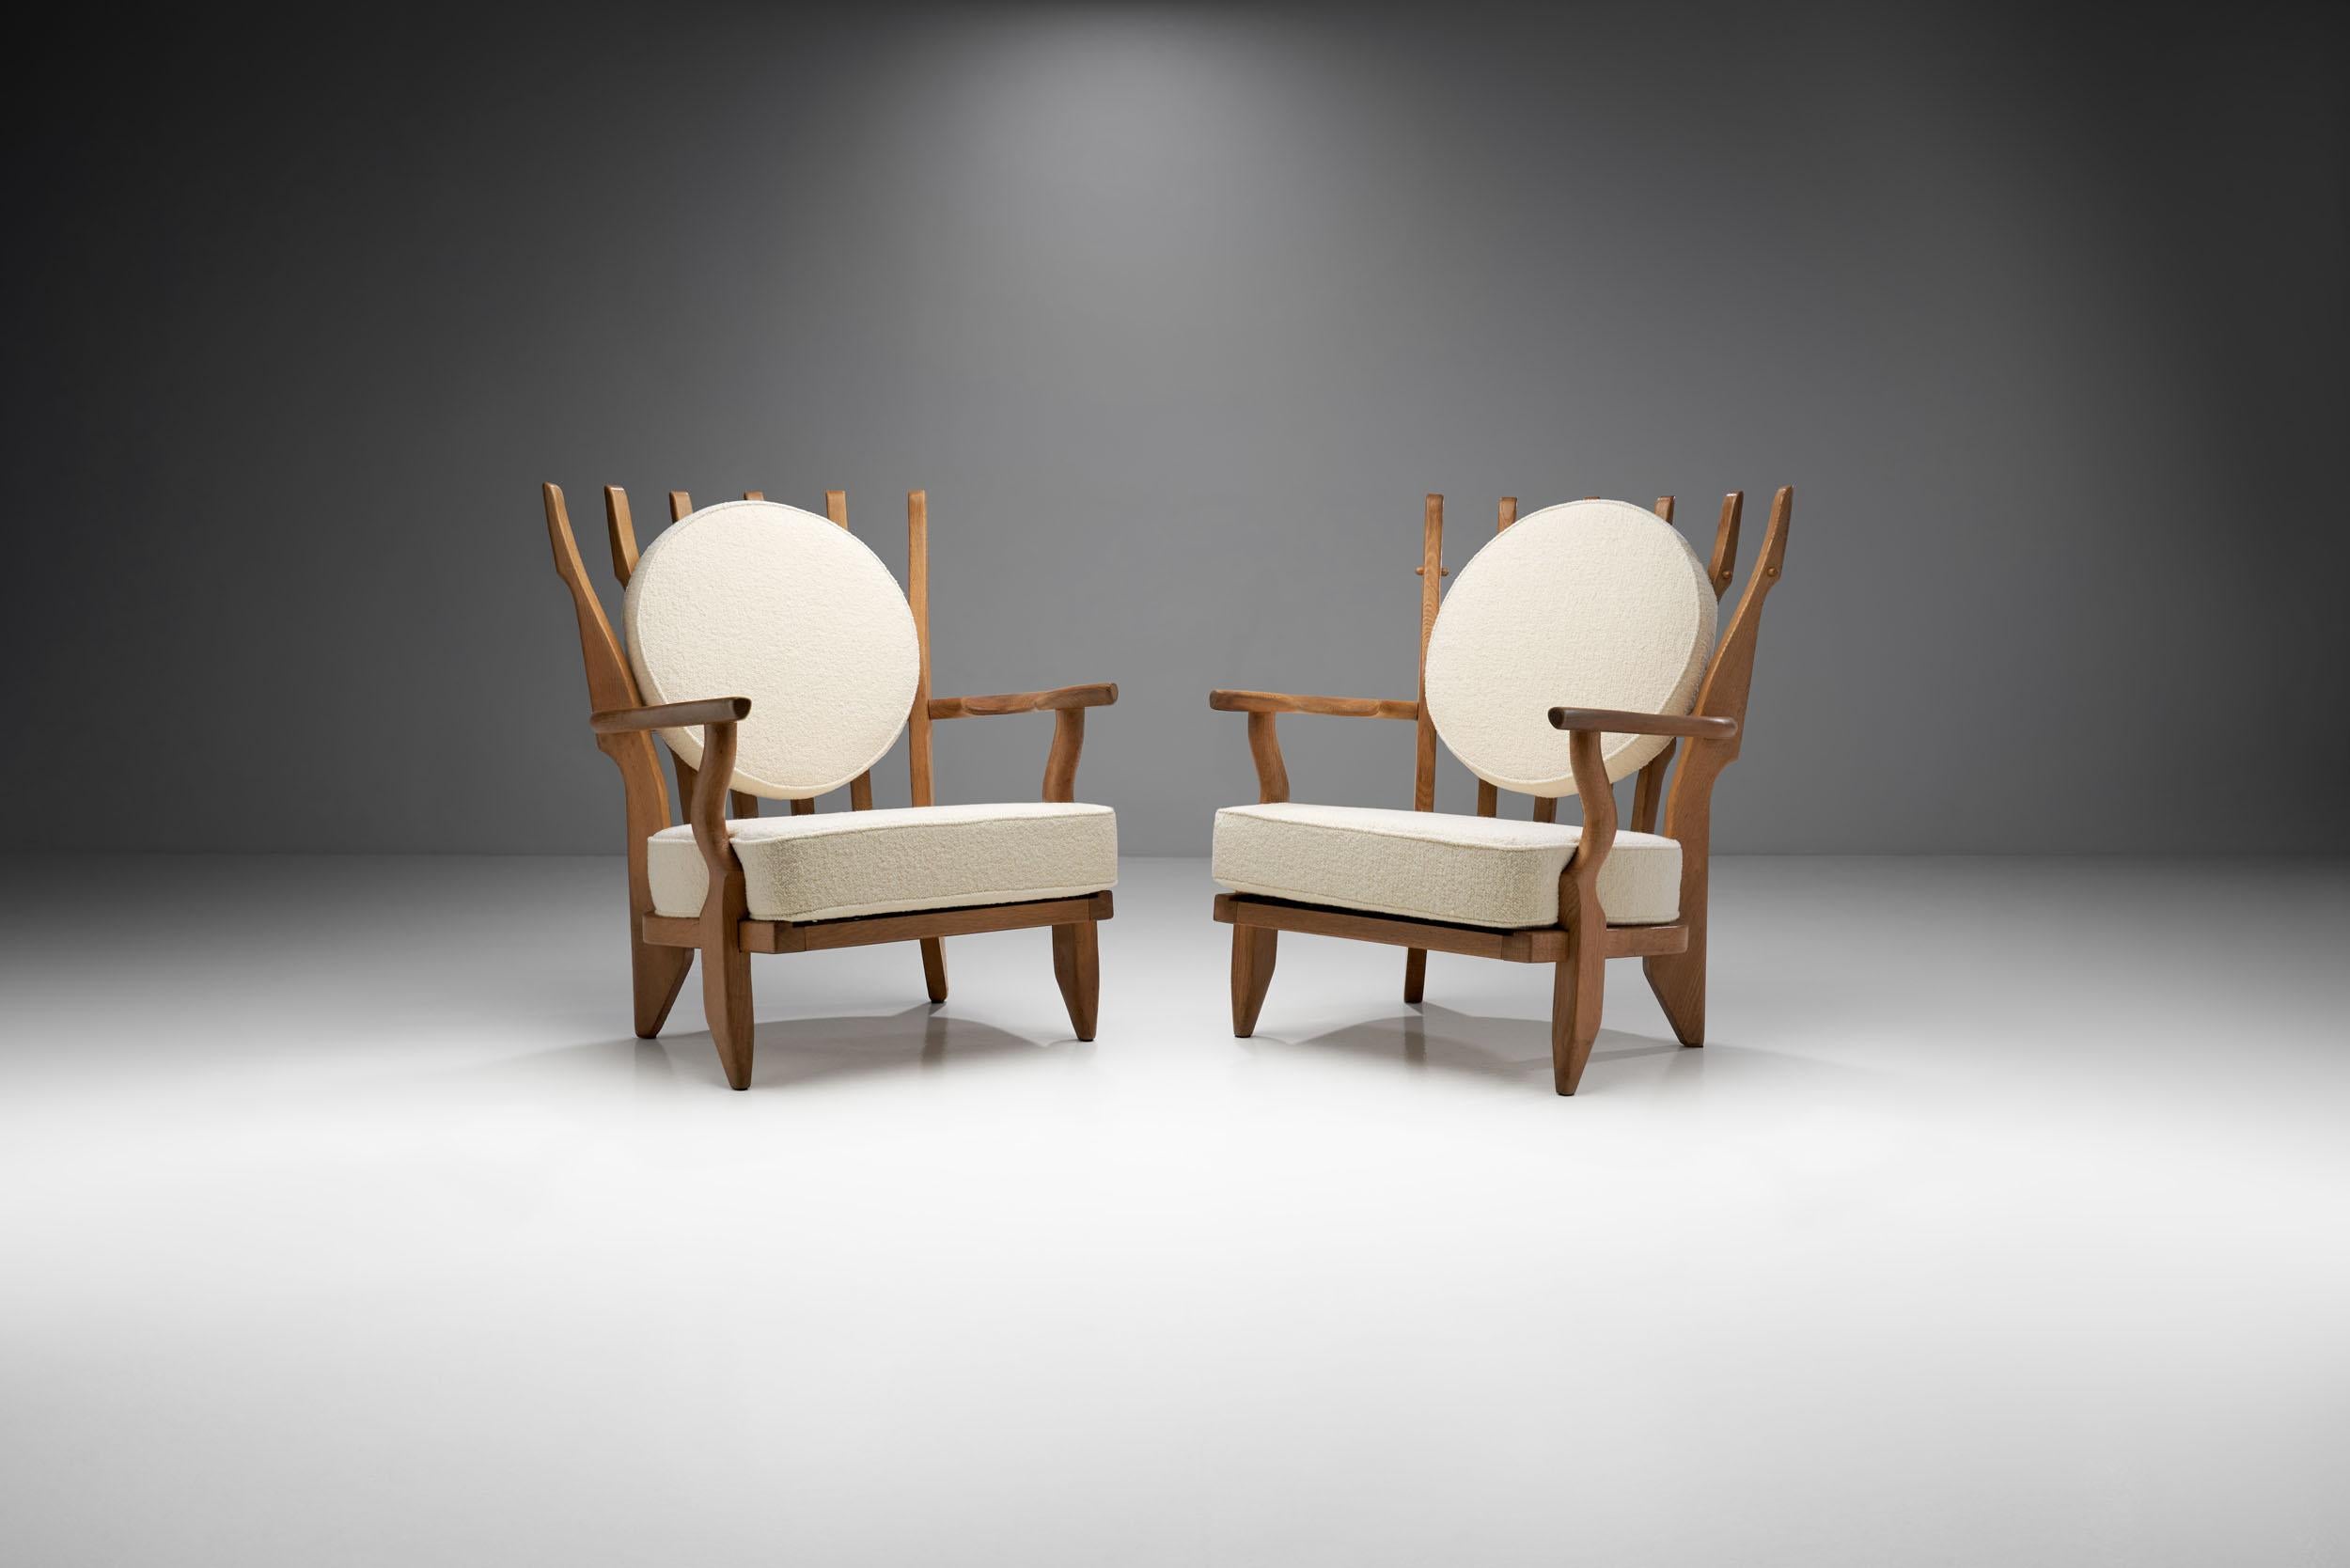 These oak “Petit Repos” chairs deserve their title of iconic. Both in terms of quality and design, this model represents why Votre Maison, the French duo’s company, influenced French design history.

These chairs are known in French as “Caqueteuse”